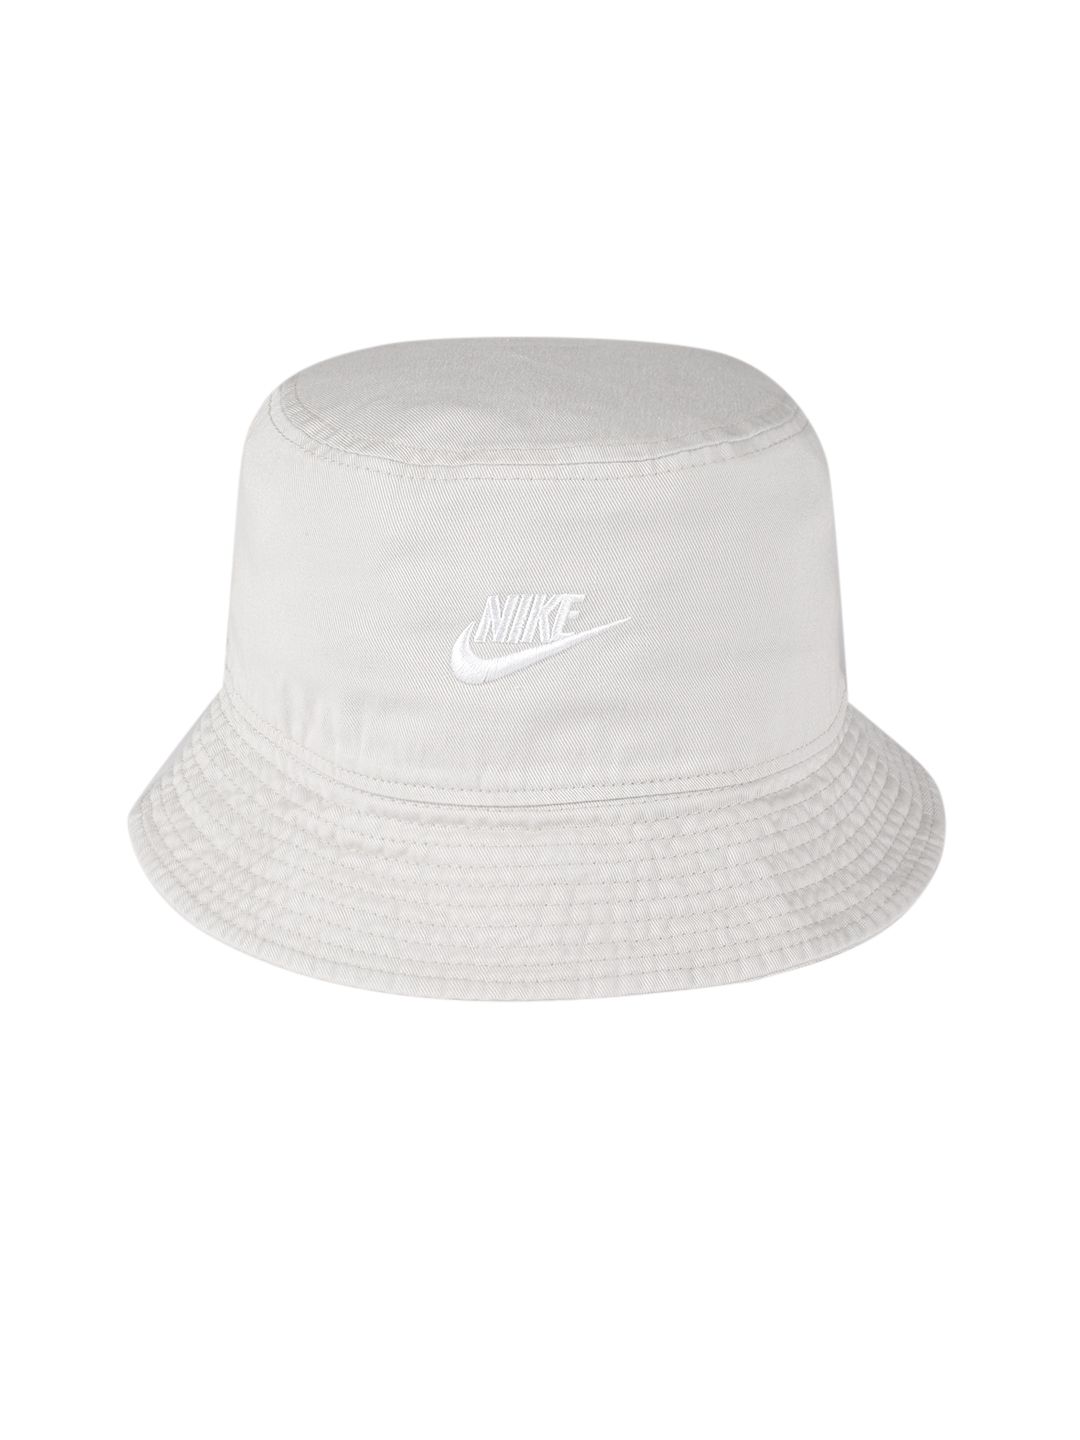 Nike Unisex Solid Cotton Bucket Hat Price in India